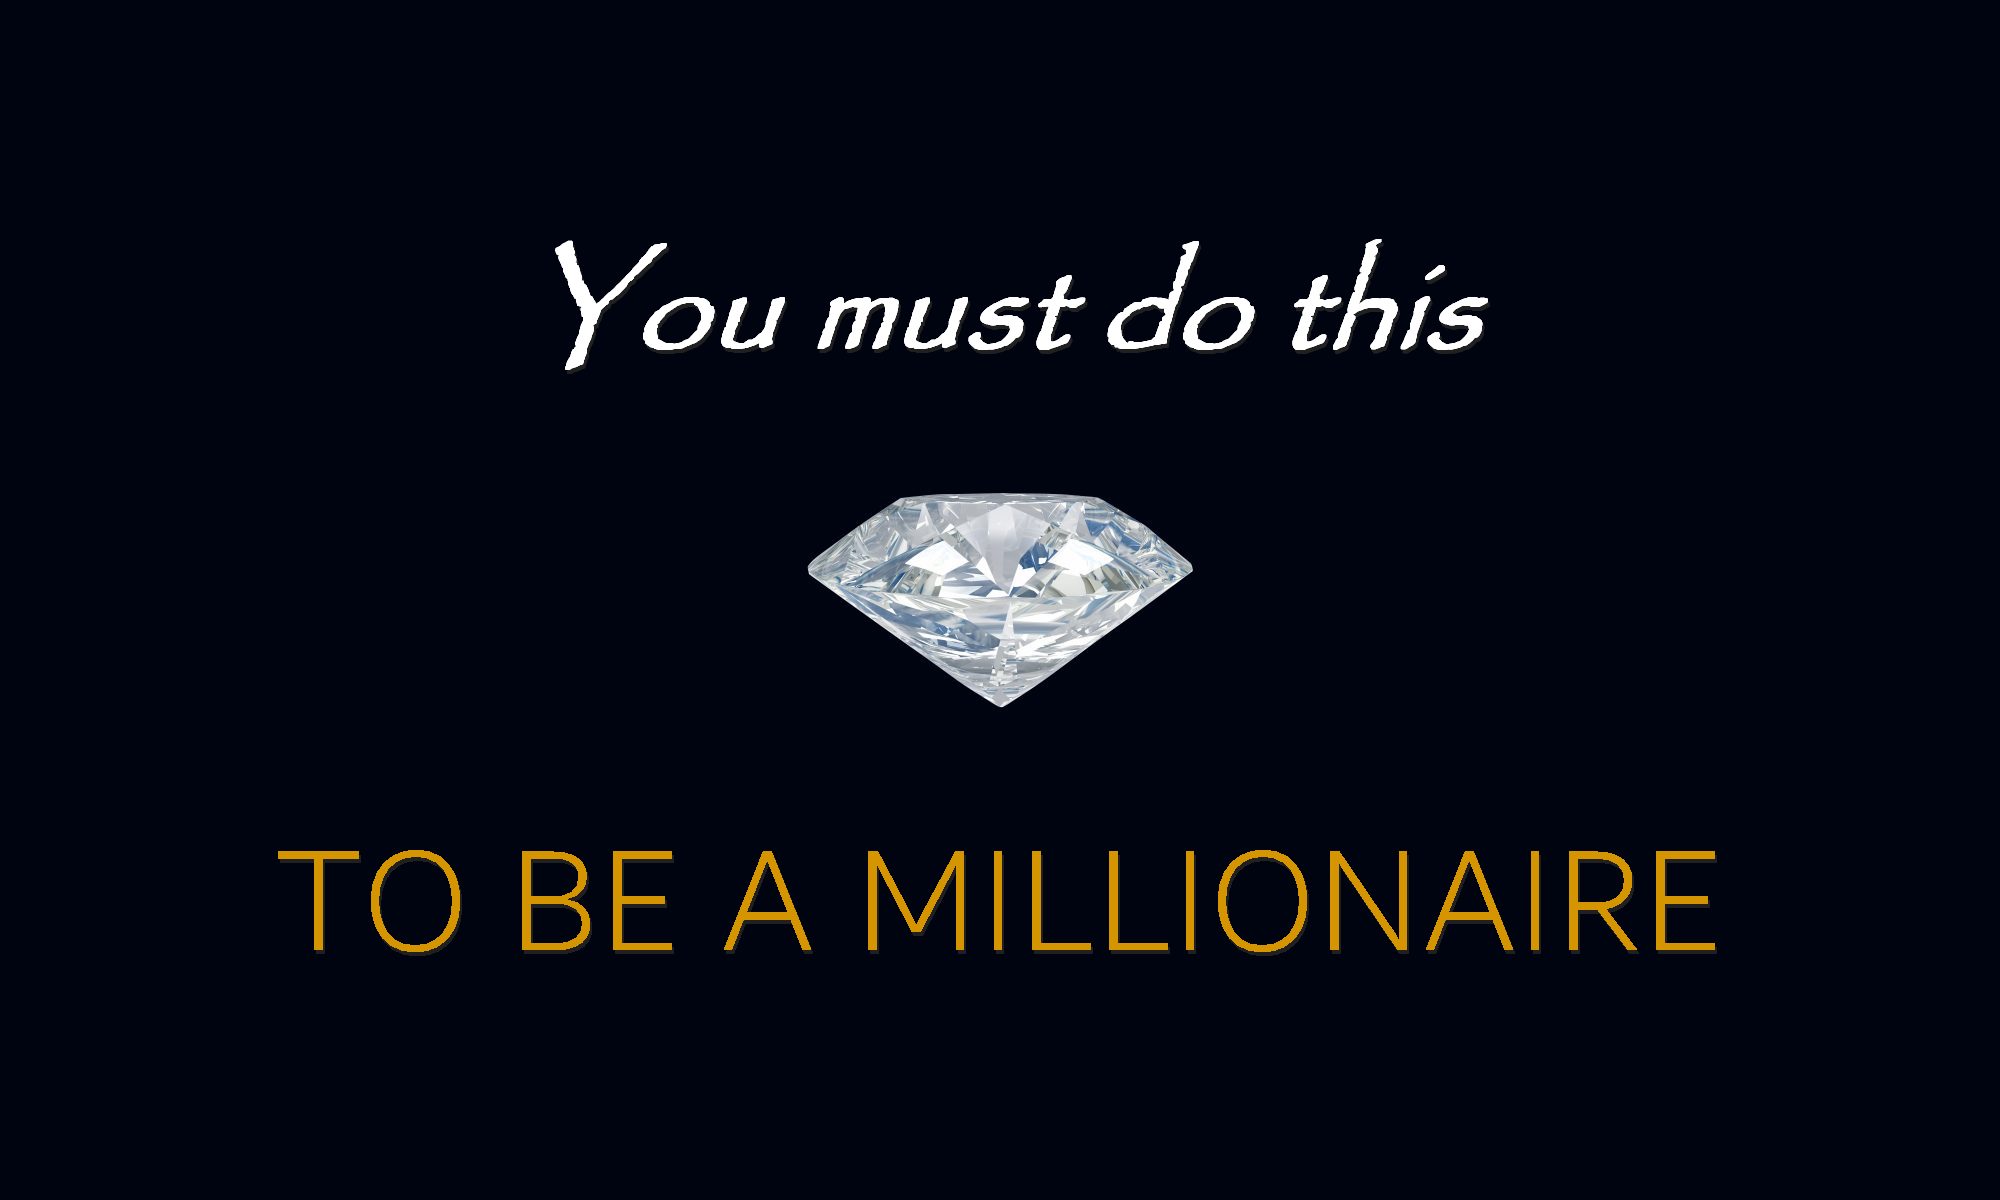 Why Aren't I a Millionaire Yet? To Be a Rich, Wealthy and Successful Person, You Must Do This!